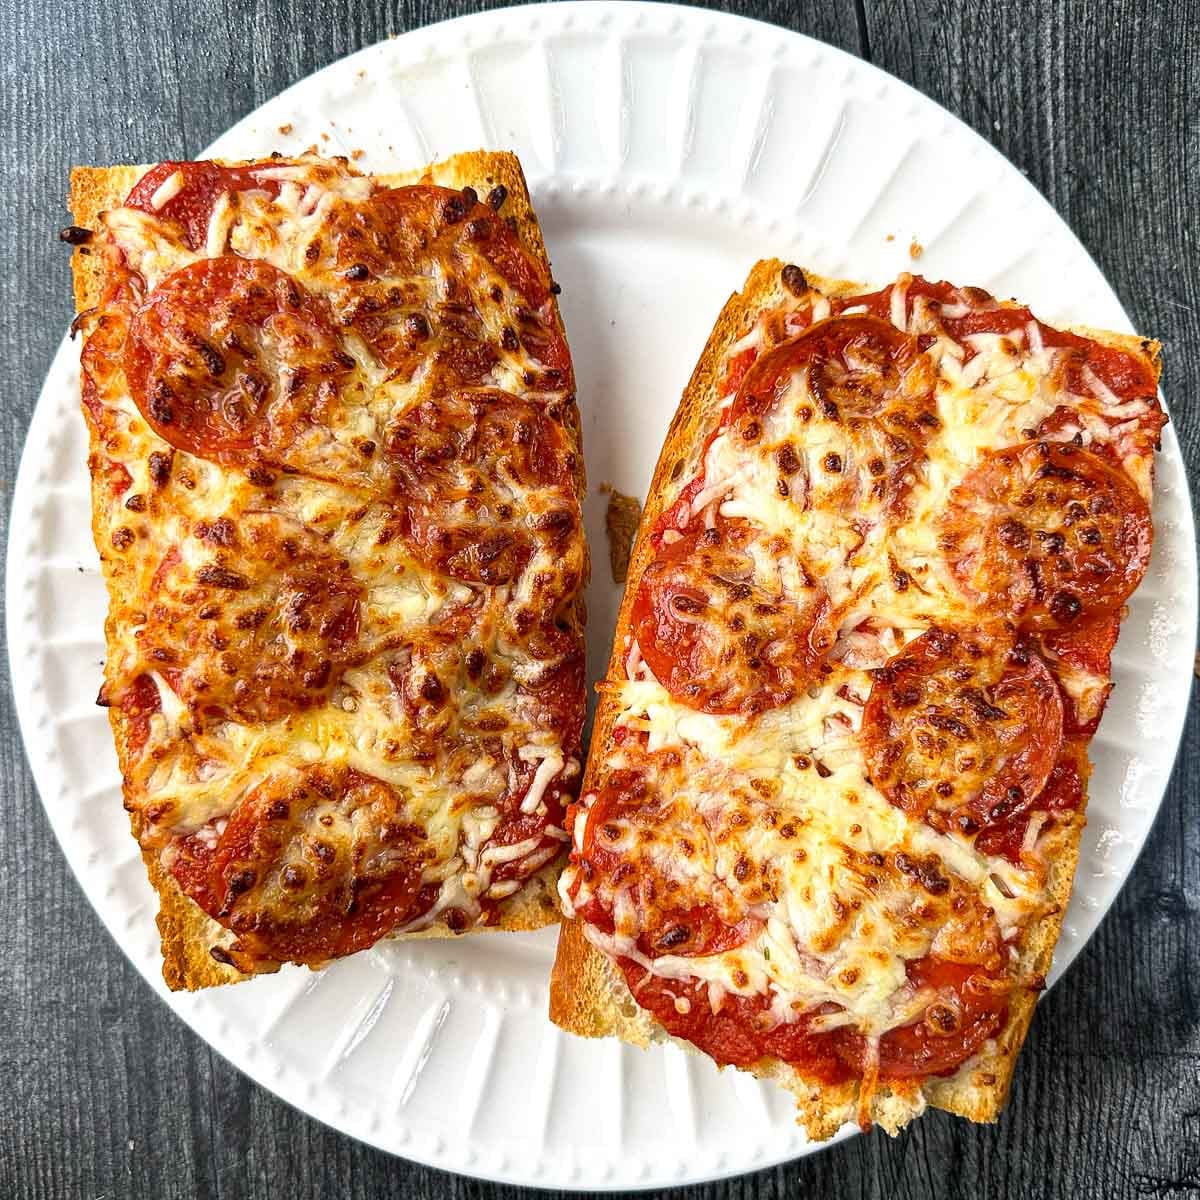 Air fryer french bread pizza